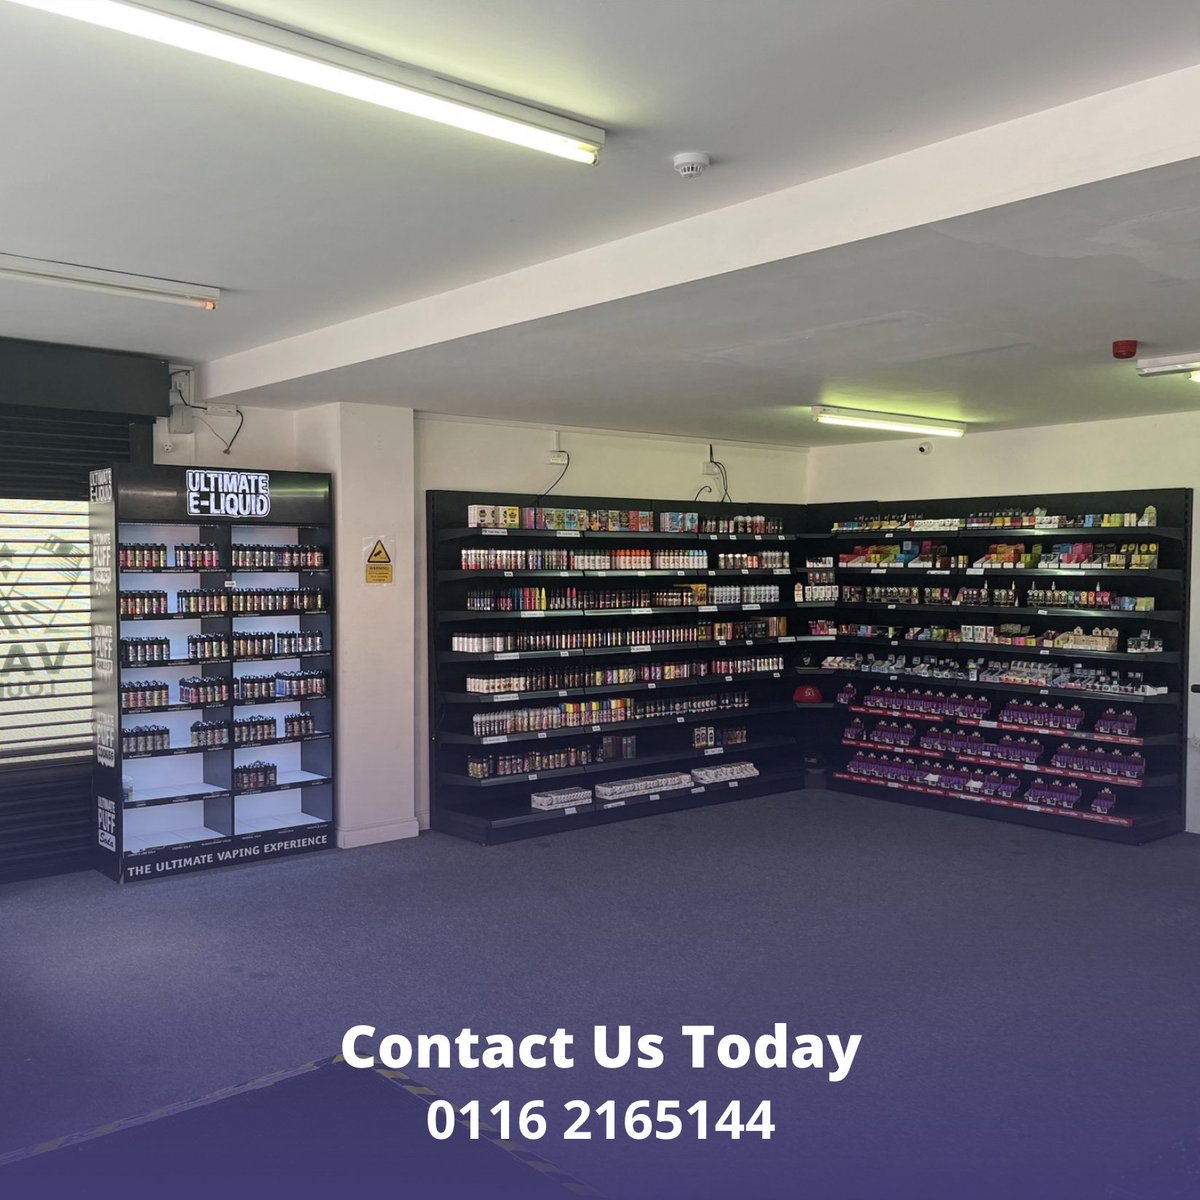 Retail Unit Available To Let November 2022
📍62 Church Gate, Leicester, LE1 4AL

1,160 Sq Ft

Contact us today 
0116 2165144
#phillipssutton #commercialproperties #commercialproperty #property #commercialrealestate #leicester #leicestercitycentre #retail #retailproperties